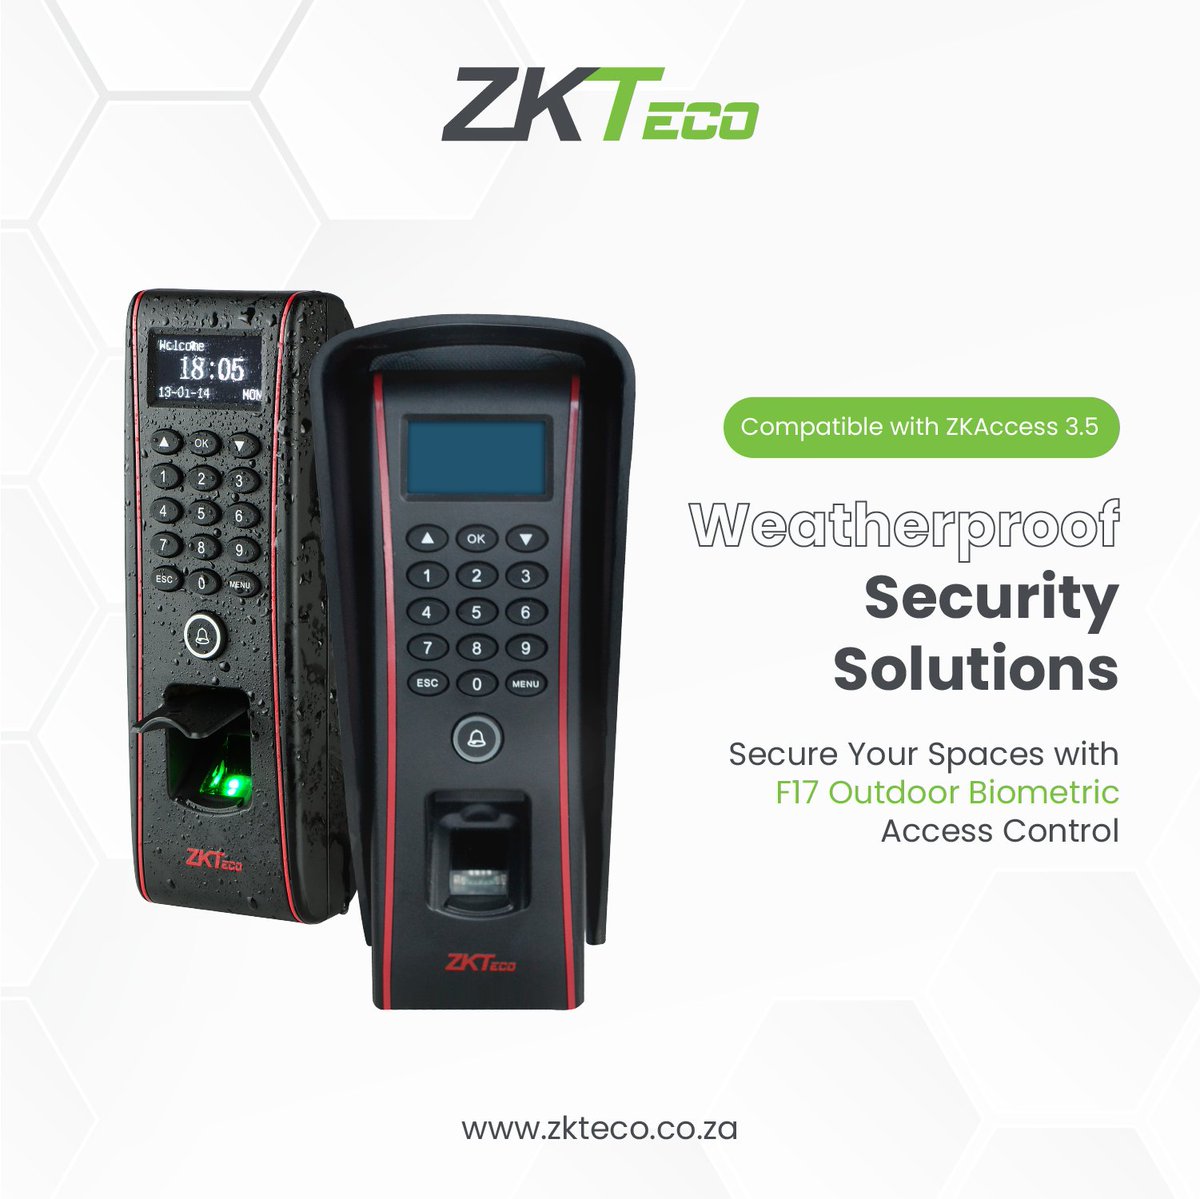 Elevate your security game with ZKTeco's F17 Outdoor Biometric Access Control. Reliable, durable, and designed to withstand the elements.

zkteco.co.za

#zkteco #zktecosa #securitysolutions #OutdoorSecurity #BiometricAccess #ZKTecoReliability #accesscontrol